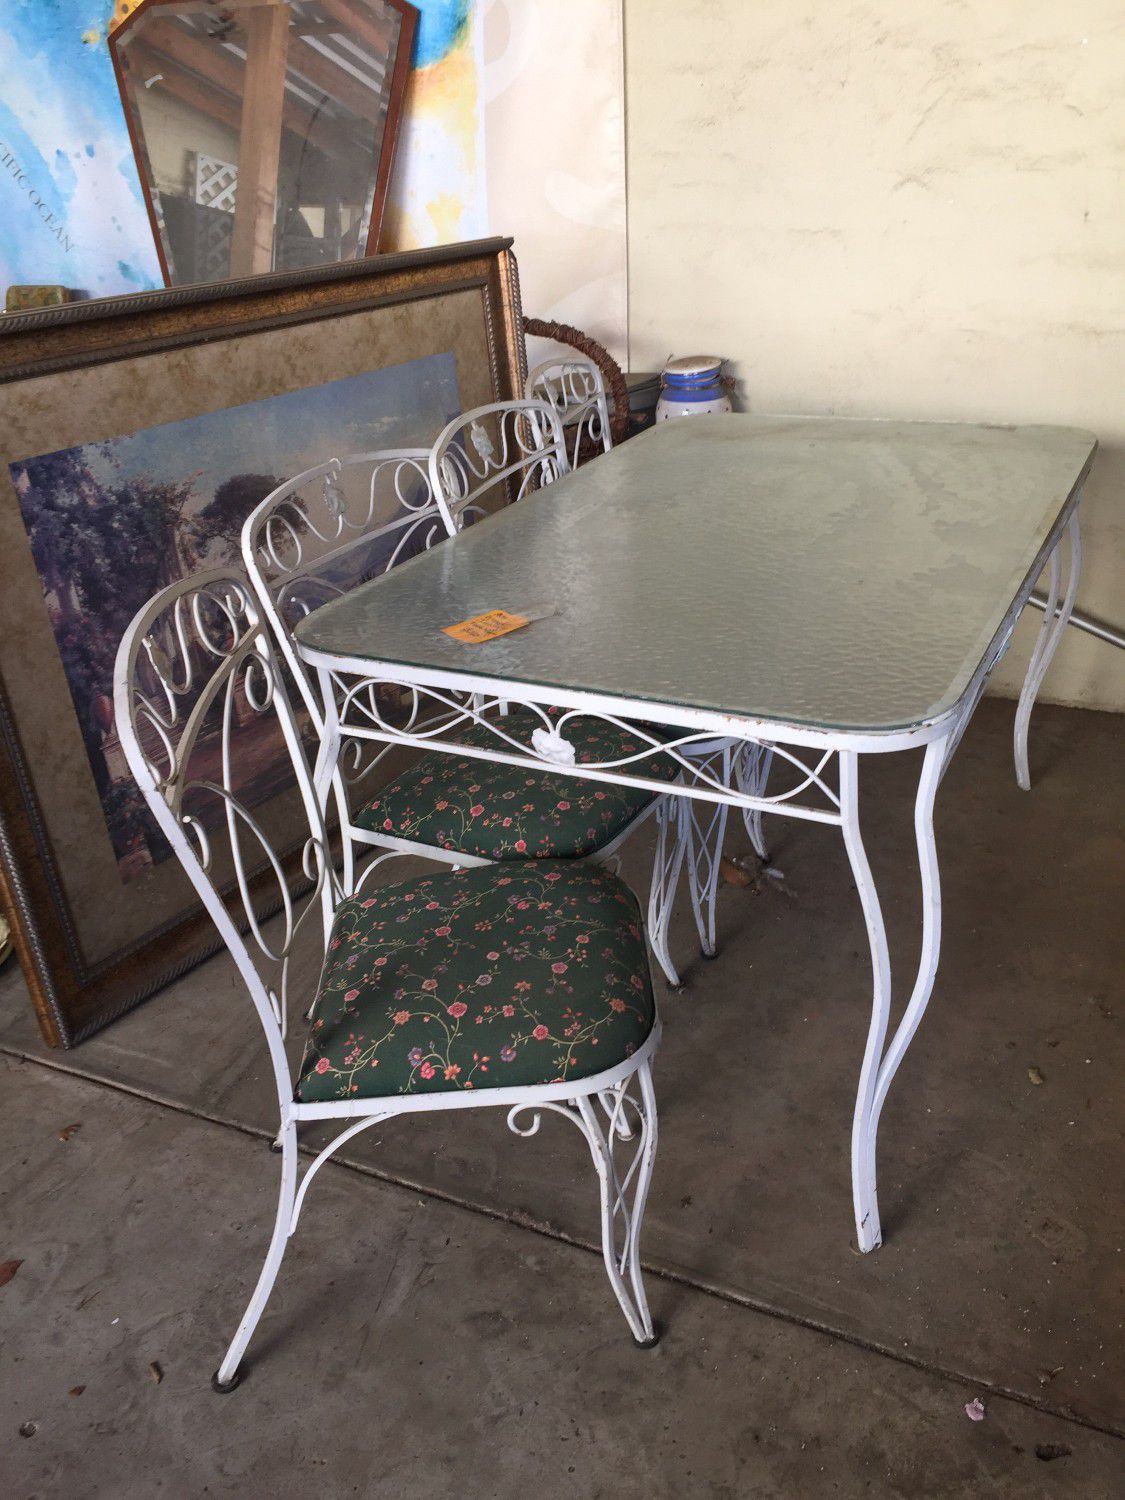 Patio table with 4 chairs..vintage..wrought iron..pay $53 now an balance end of month..full price $150..no credit check no interest